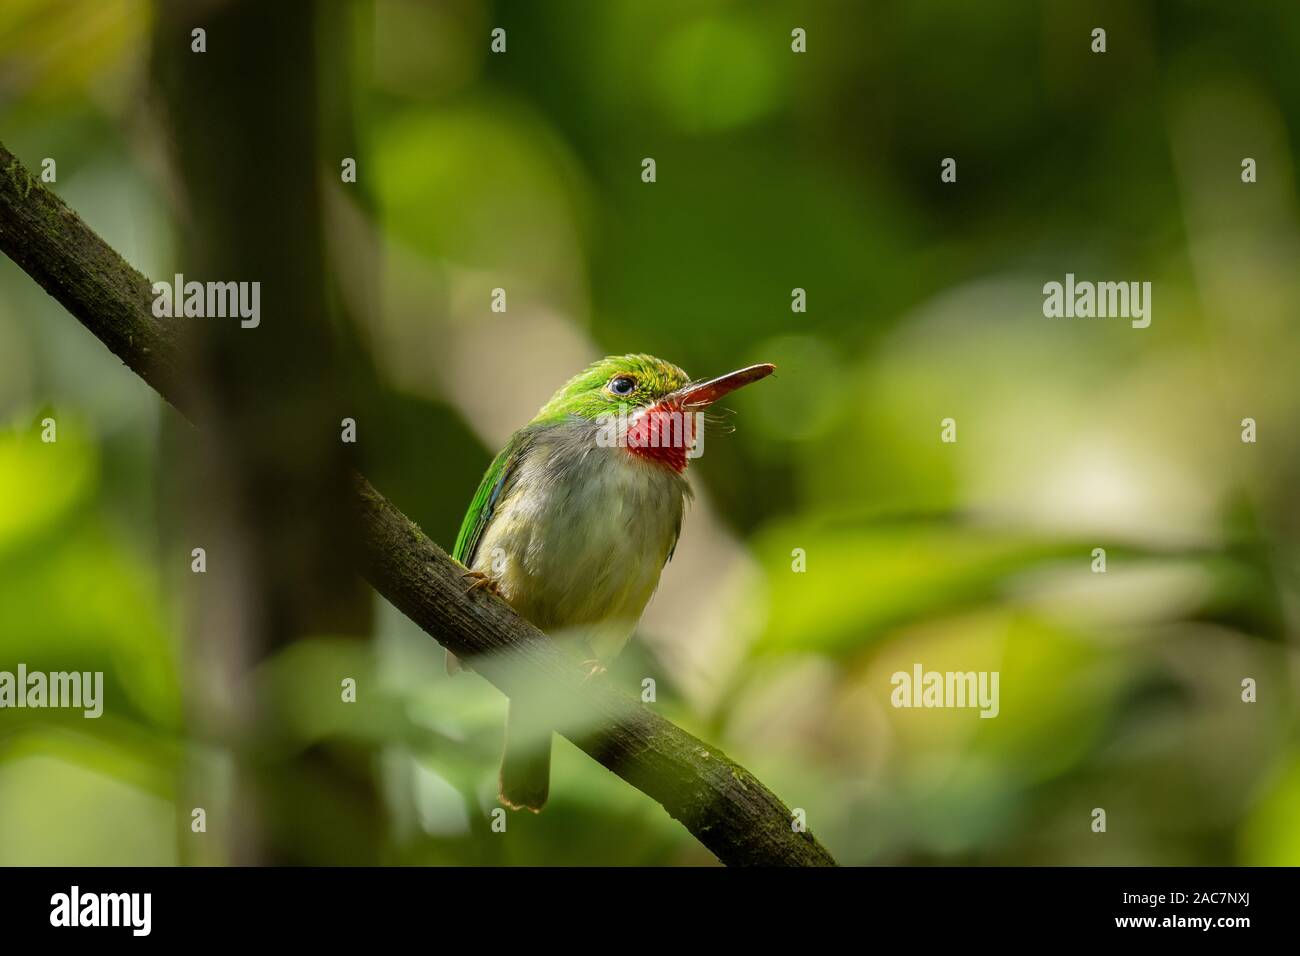 Puerto Rican Tody (Todus mexicanus) in El Yunque National Forest, Puerto Rico. Endemic to Puerto Rico. Possibly the cutest bird in the world. Stock Photo